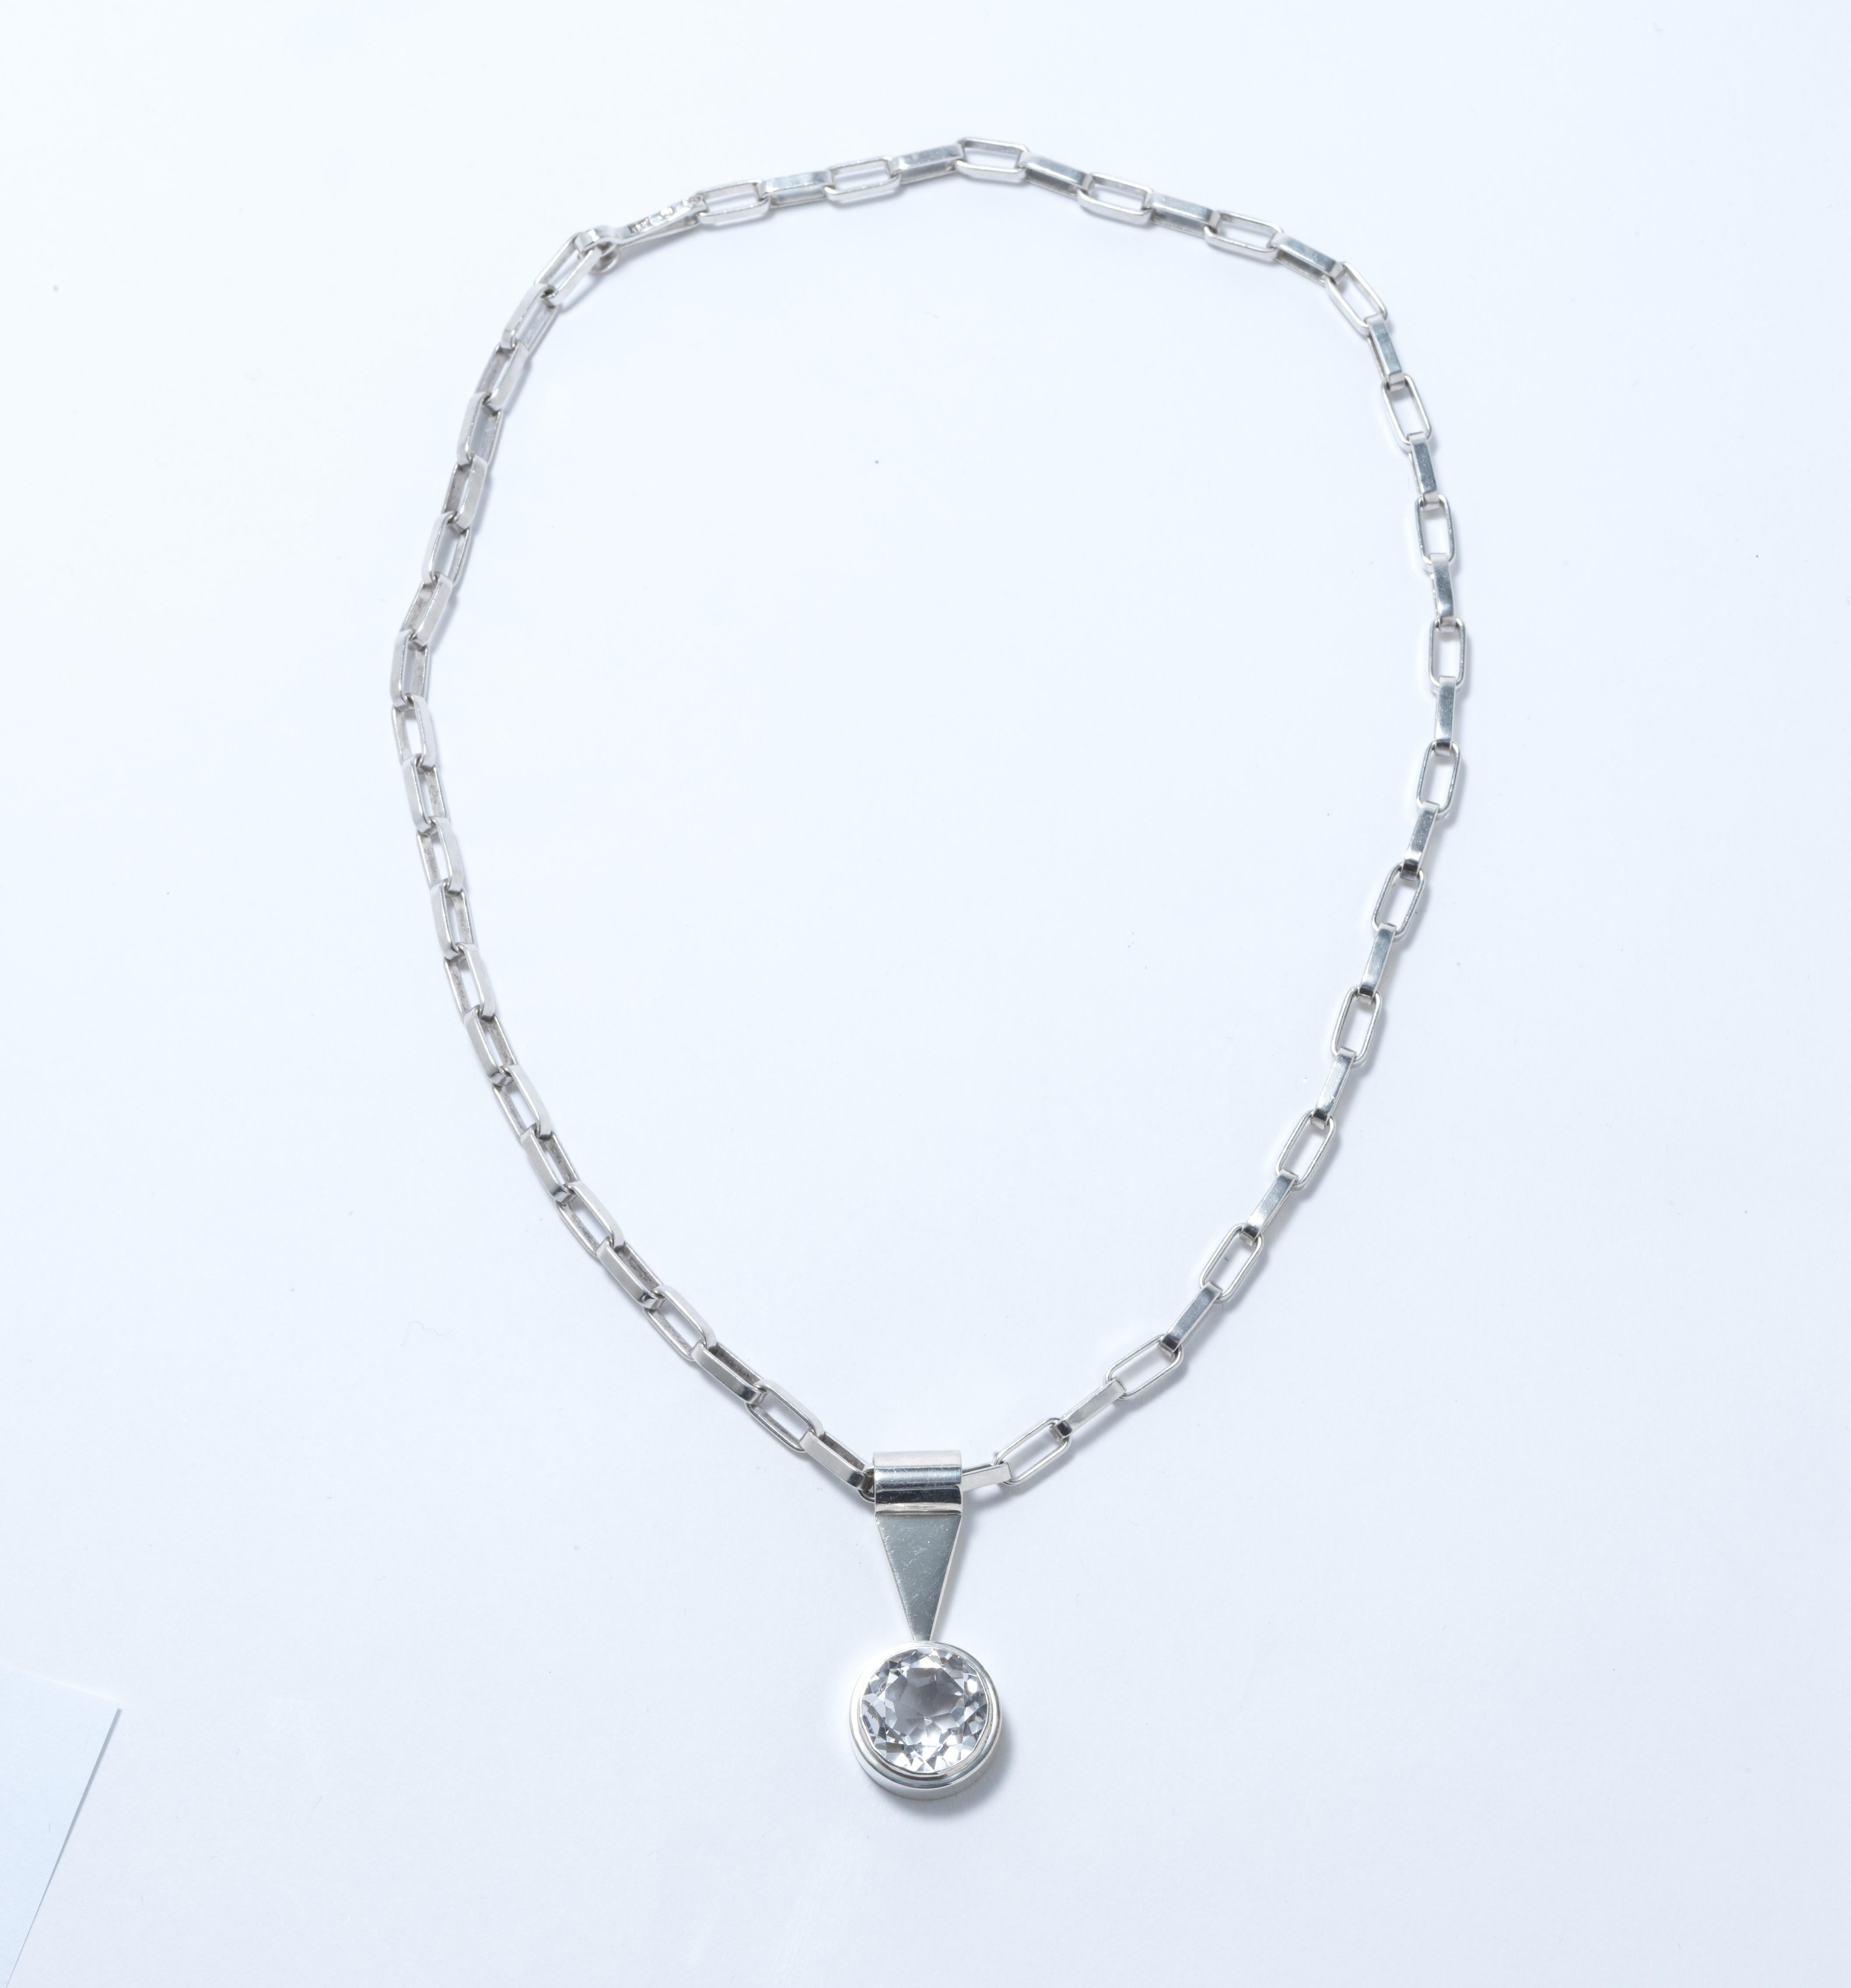 A silver necklace made in 1968 by the Swedish silver smith master Anders Högberg. He was at this time one of the most known smiths in Sweden. It has a strong chain with oval links on which a pendant hangs. The pendant, also made of silver,  has a